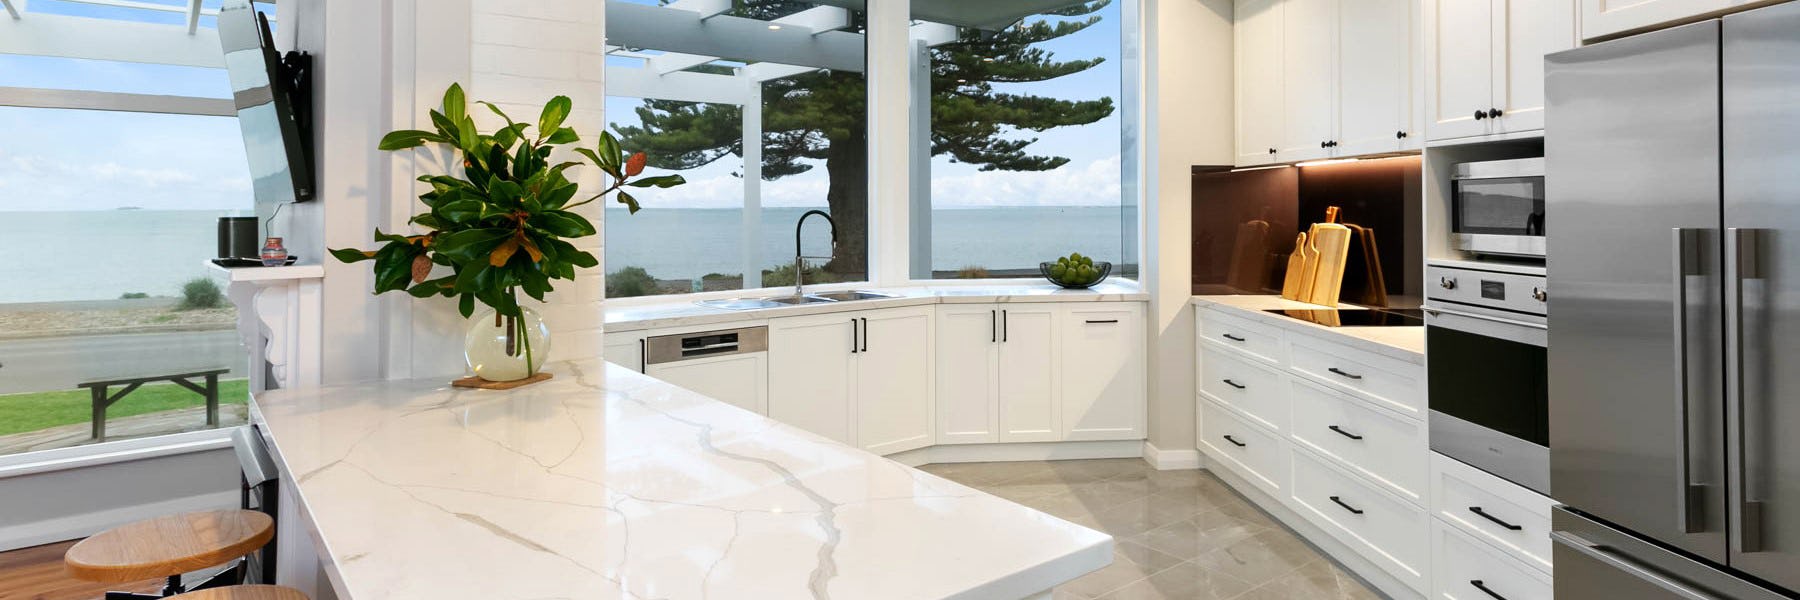 An angled kitchen with an island separating kitchen from living area